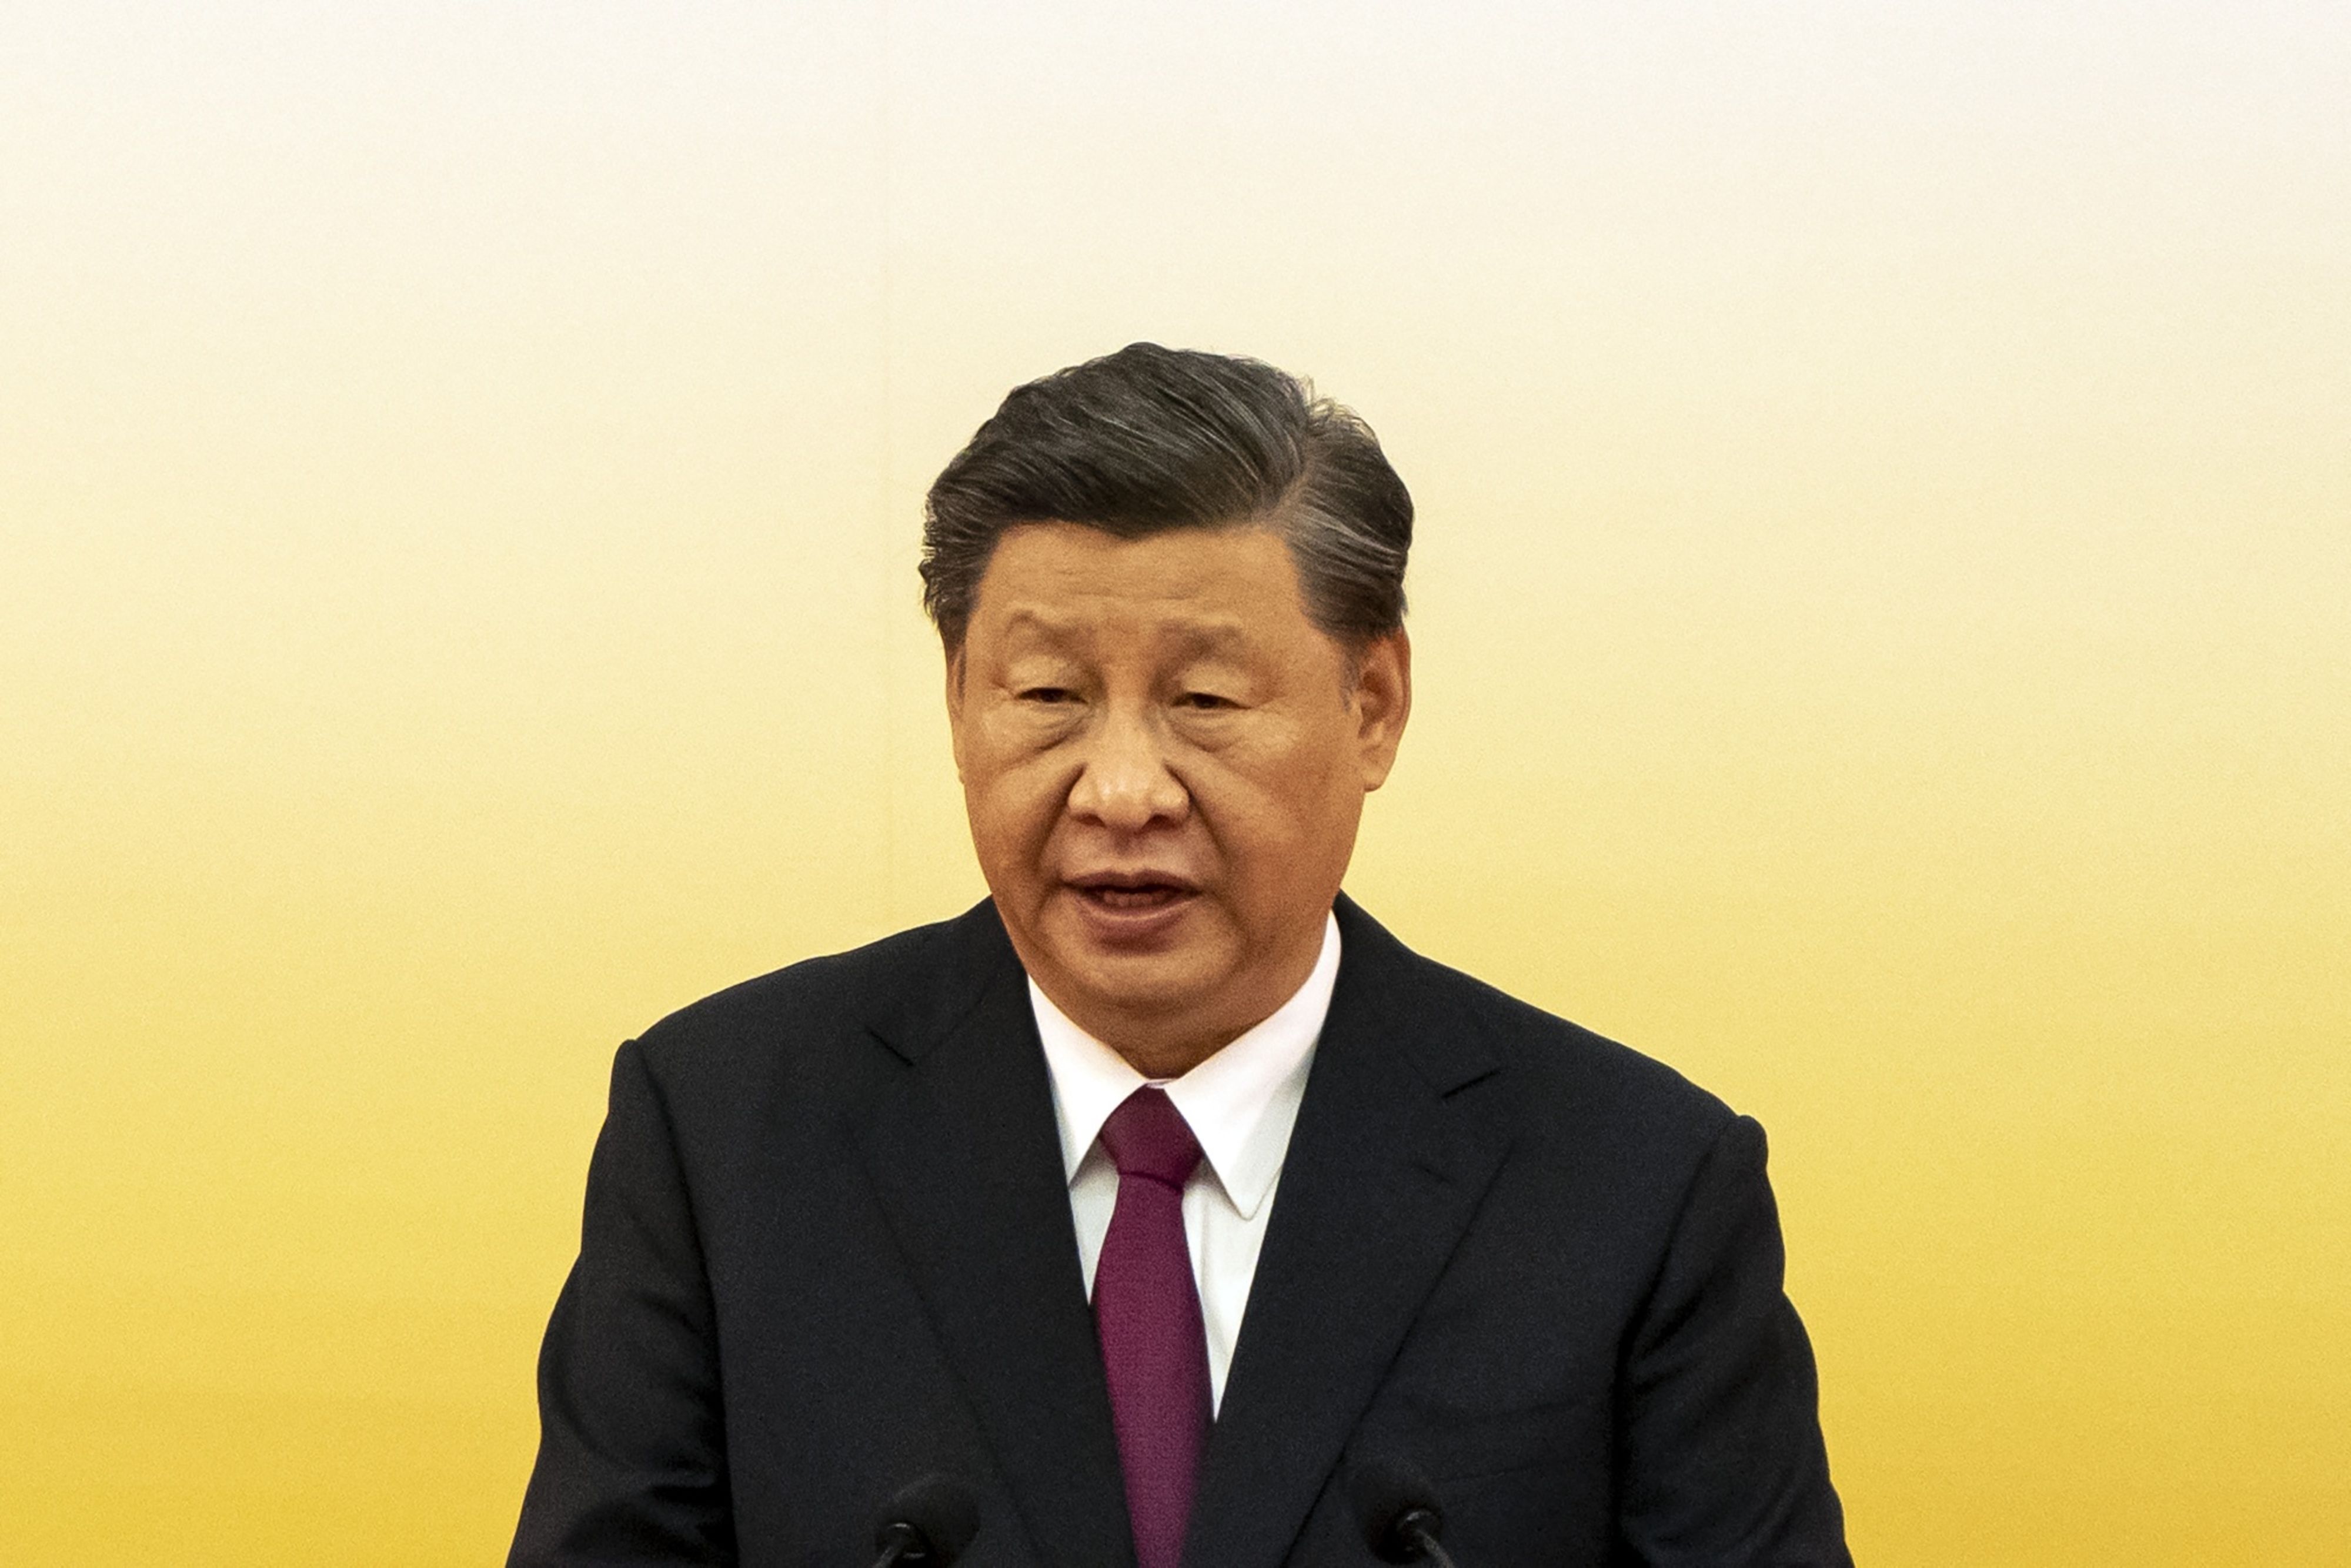 Xi Jinping, China's president, speaks at a swearing-in ceremony for Hong Kong's chief executive John Lee in Hong Kong, China, on Friday, July 1, 2022. (Bloomberg—© 2022 Bloomberg Finance LP)